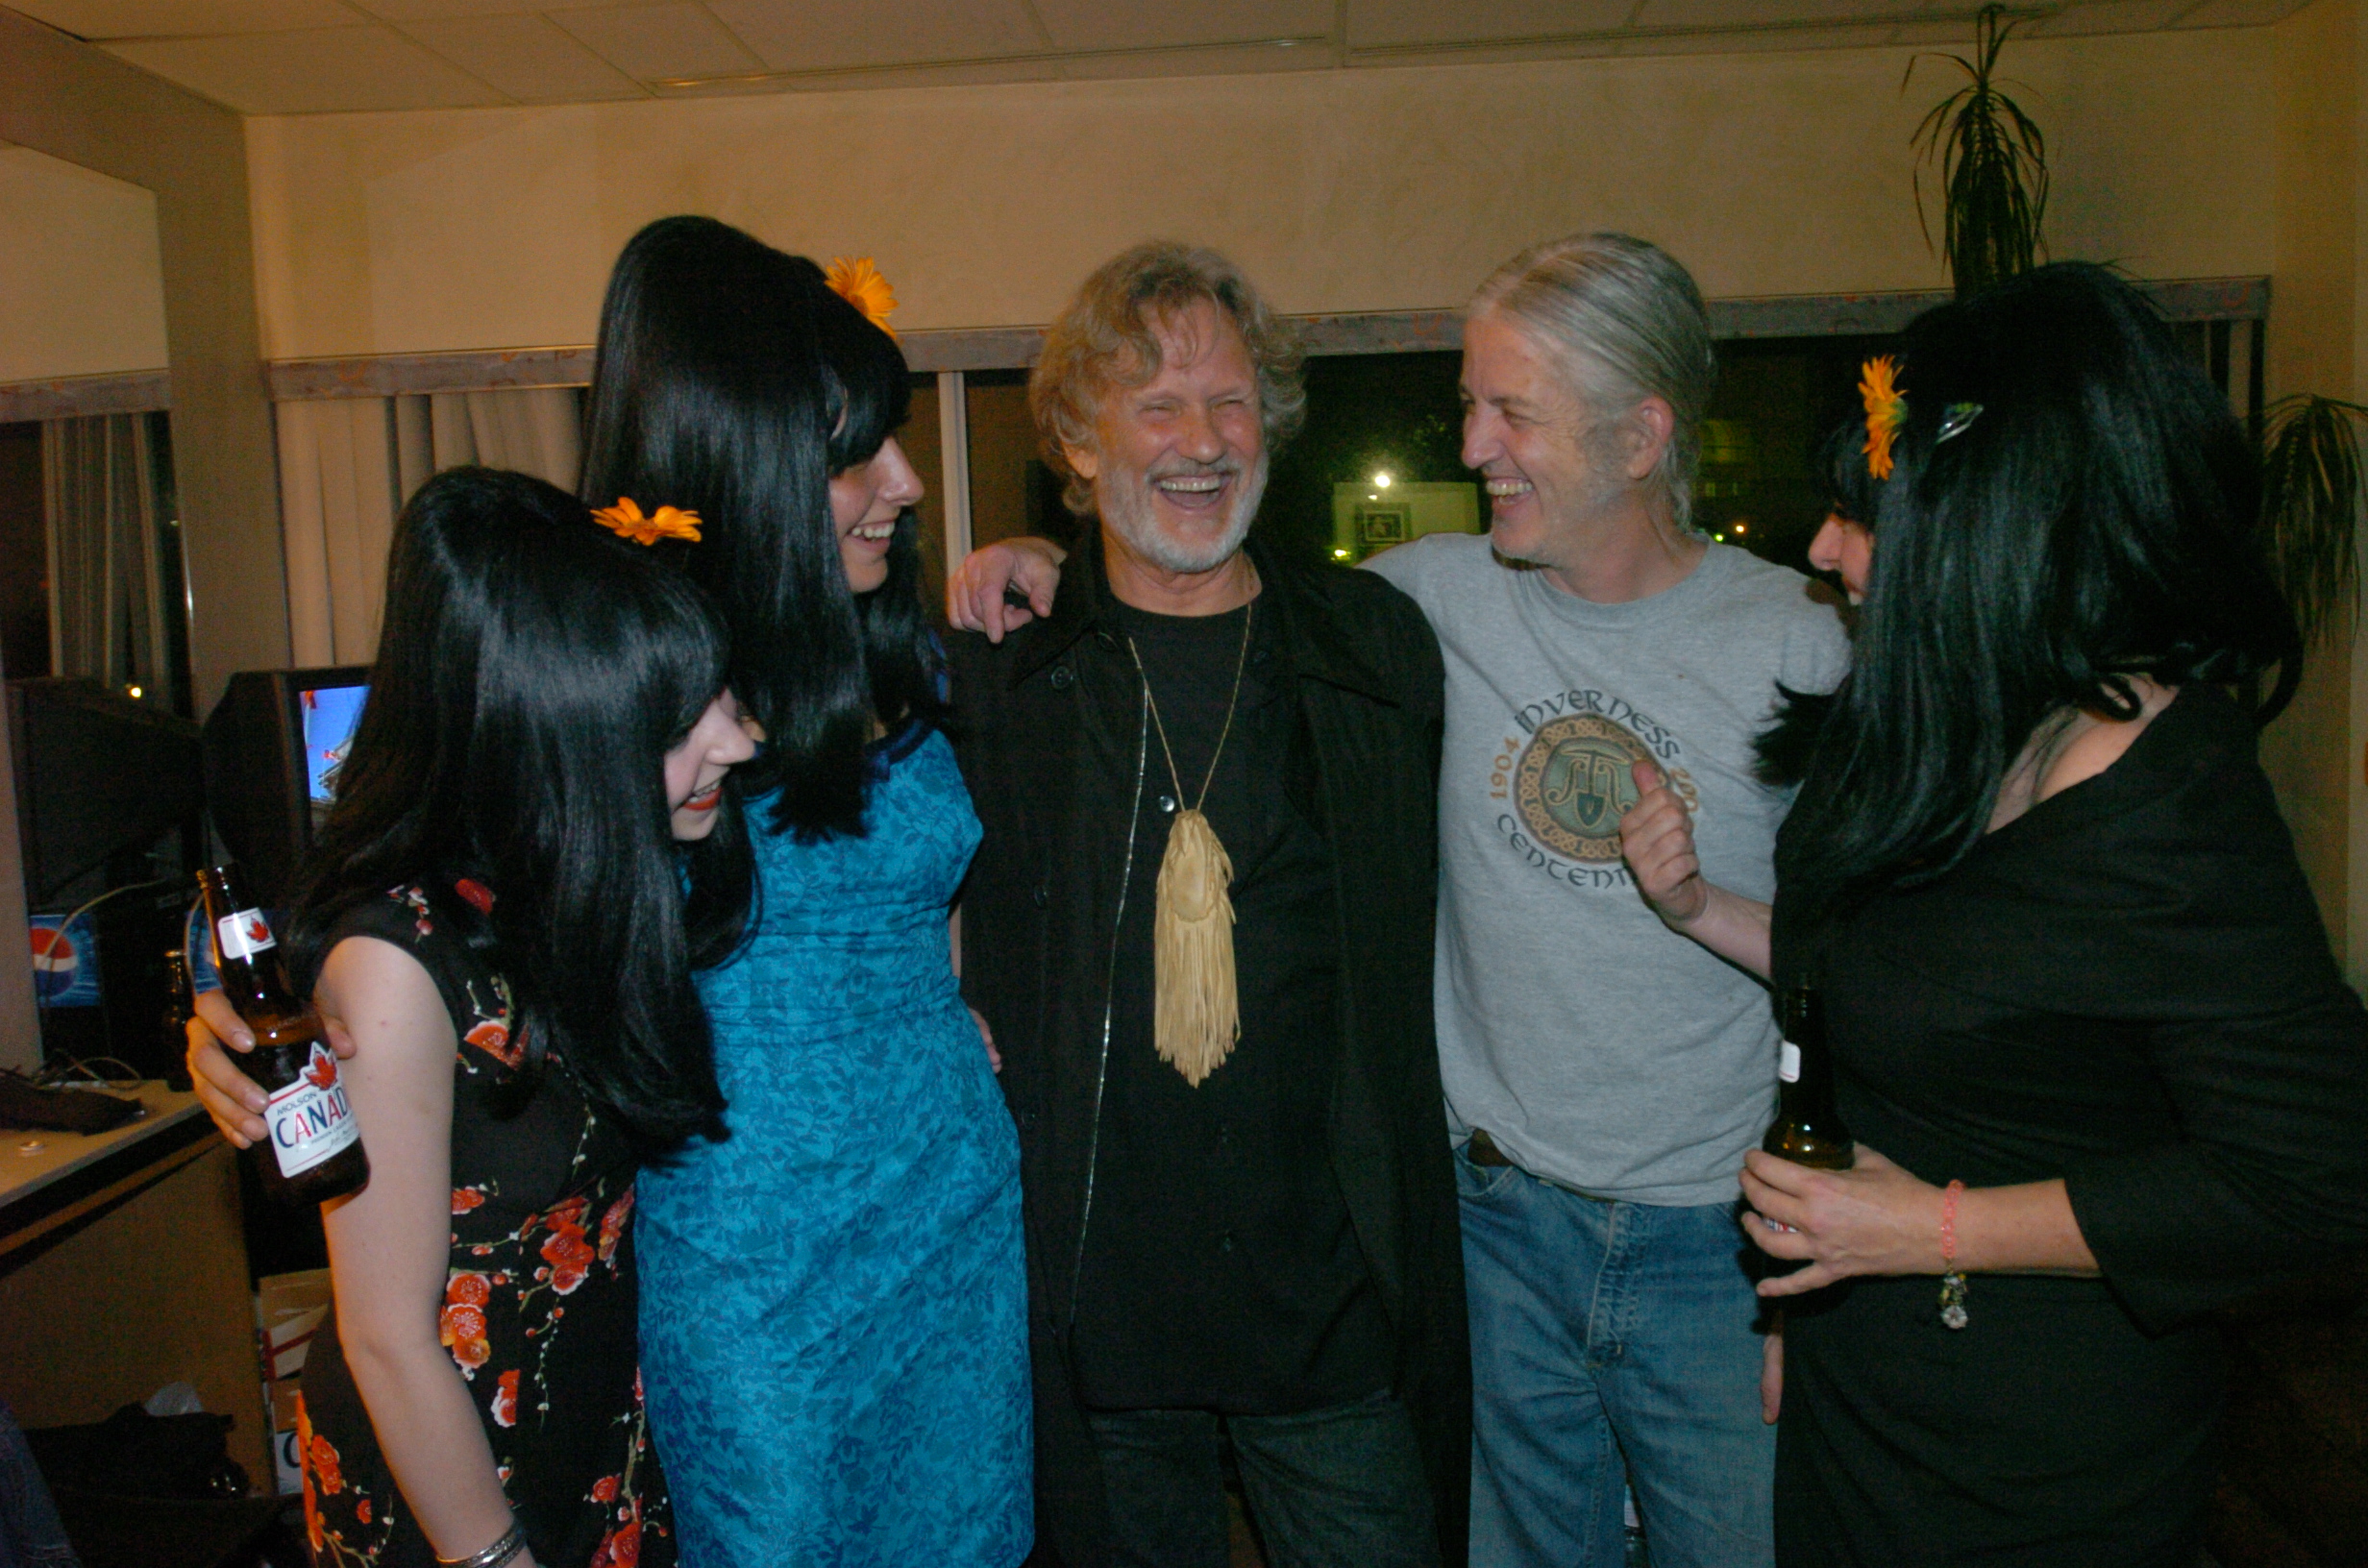 The Real Priscilla's with Kris Kristofferson and Greg Keelor